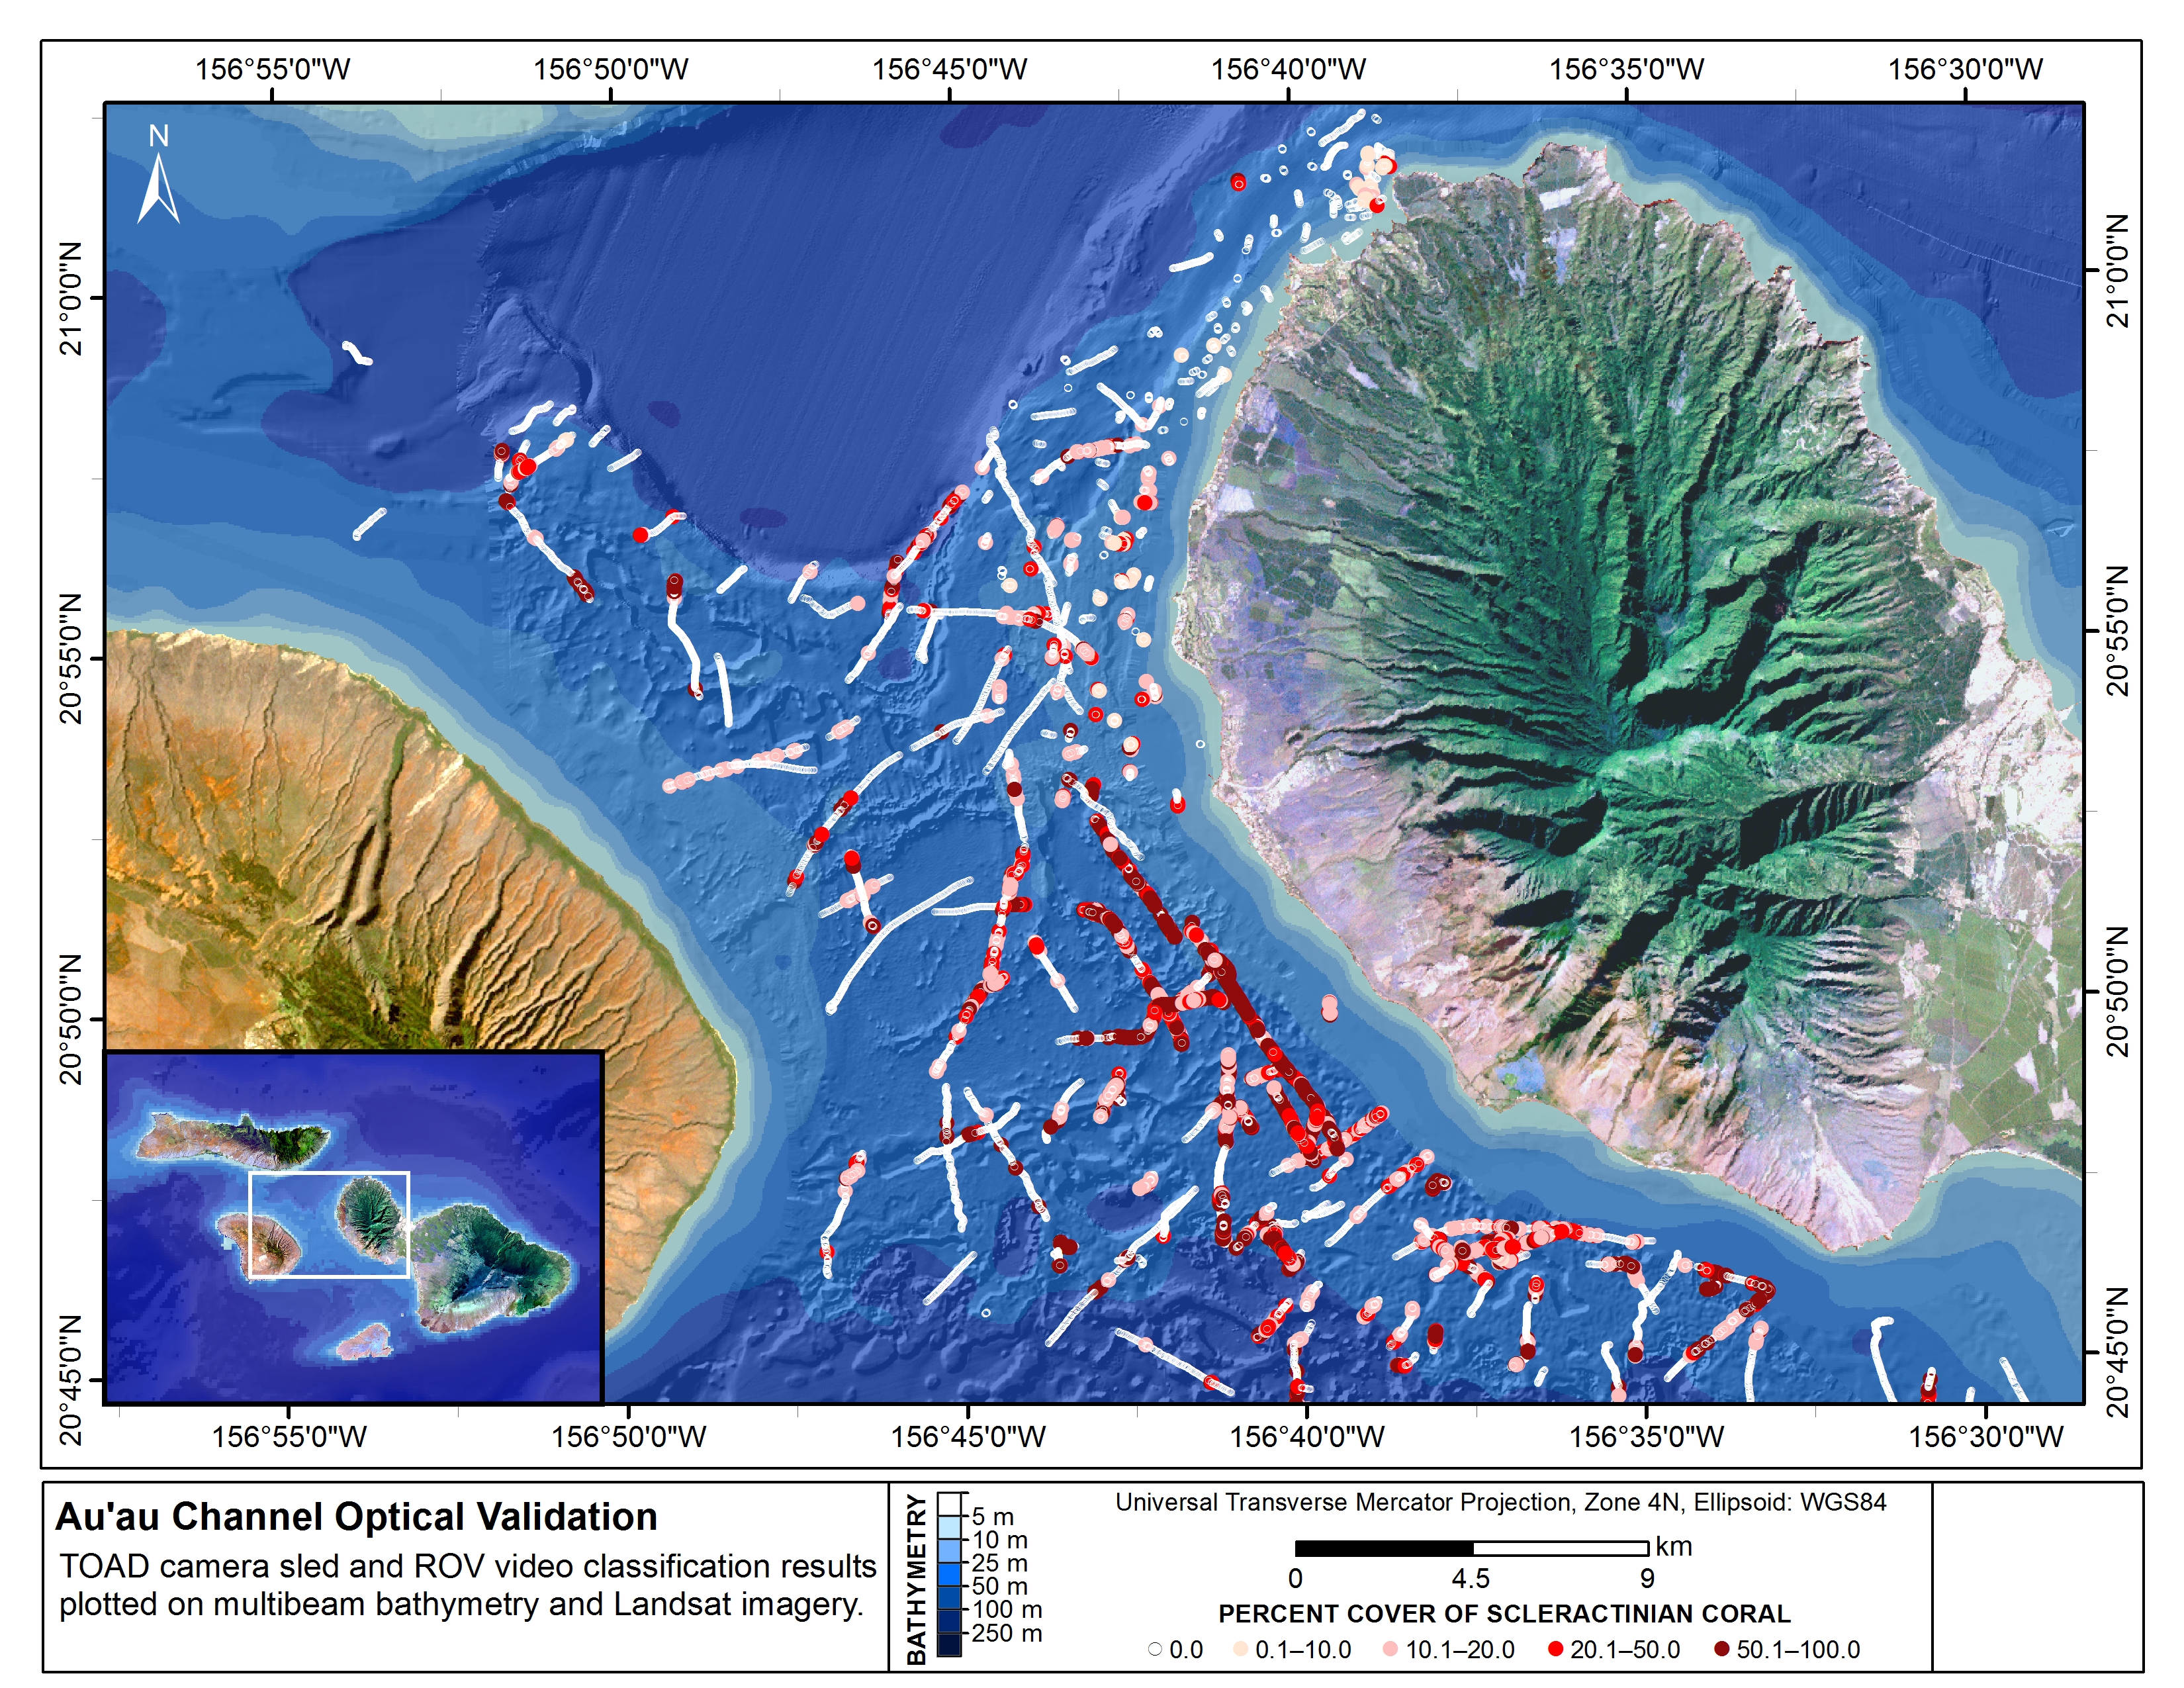 Maui: Optical Validation | Pacific Islands Benthic Habitat Mapping Center